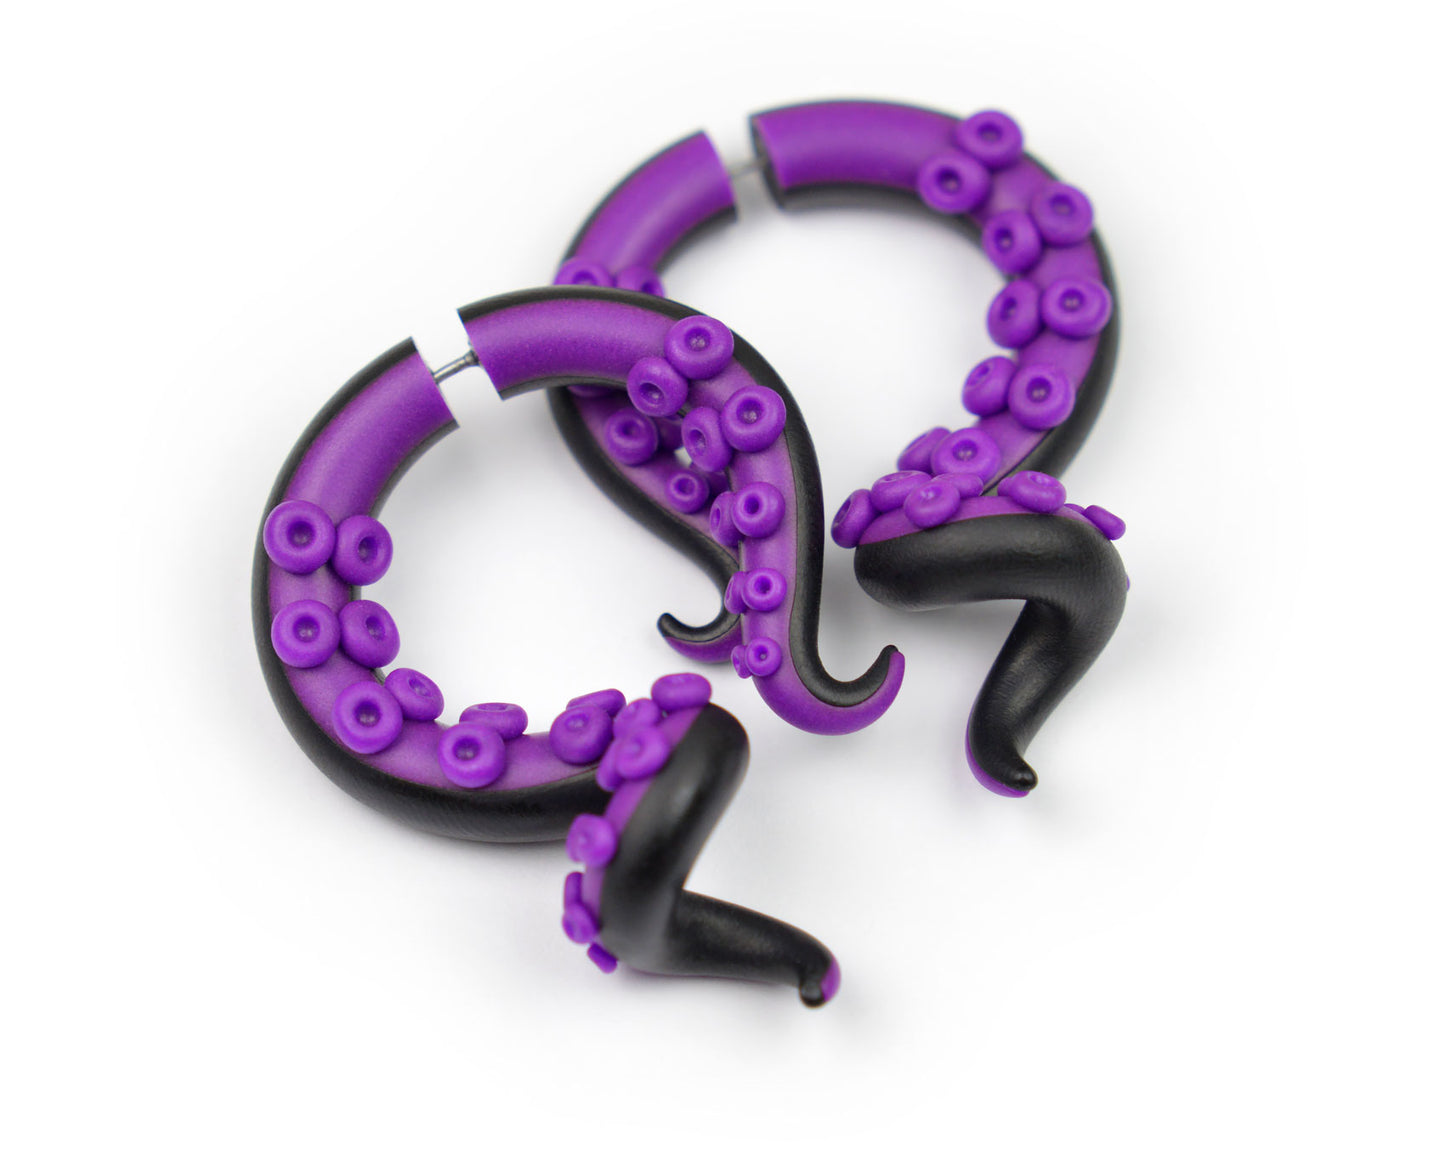 Ursula Earrings The Sea Witch Tentacle Earrings Octopus Ursula Cosplay